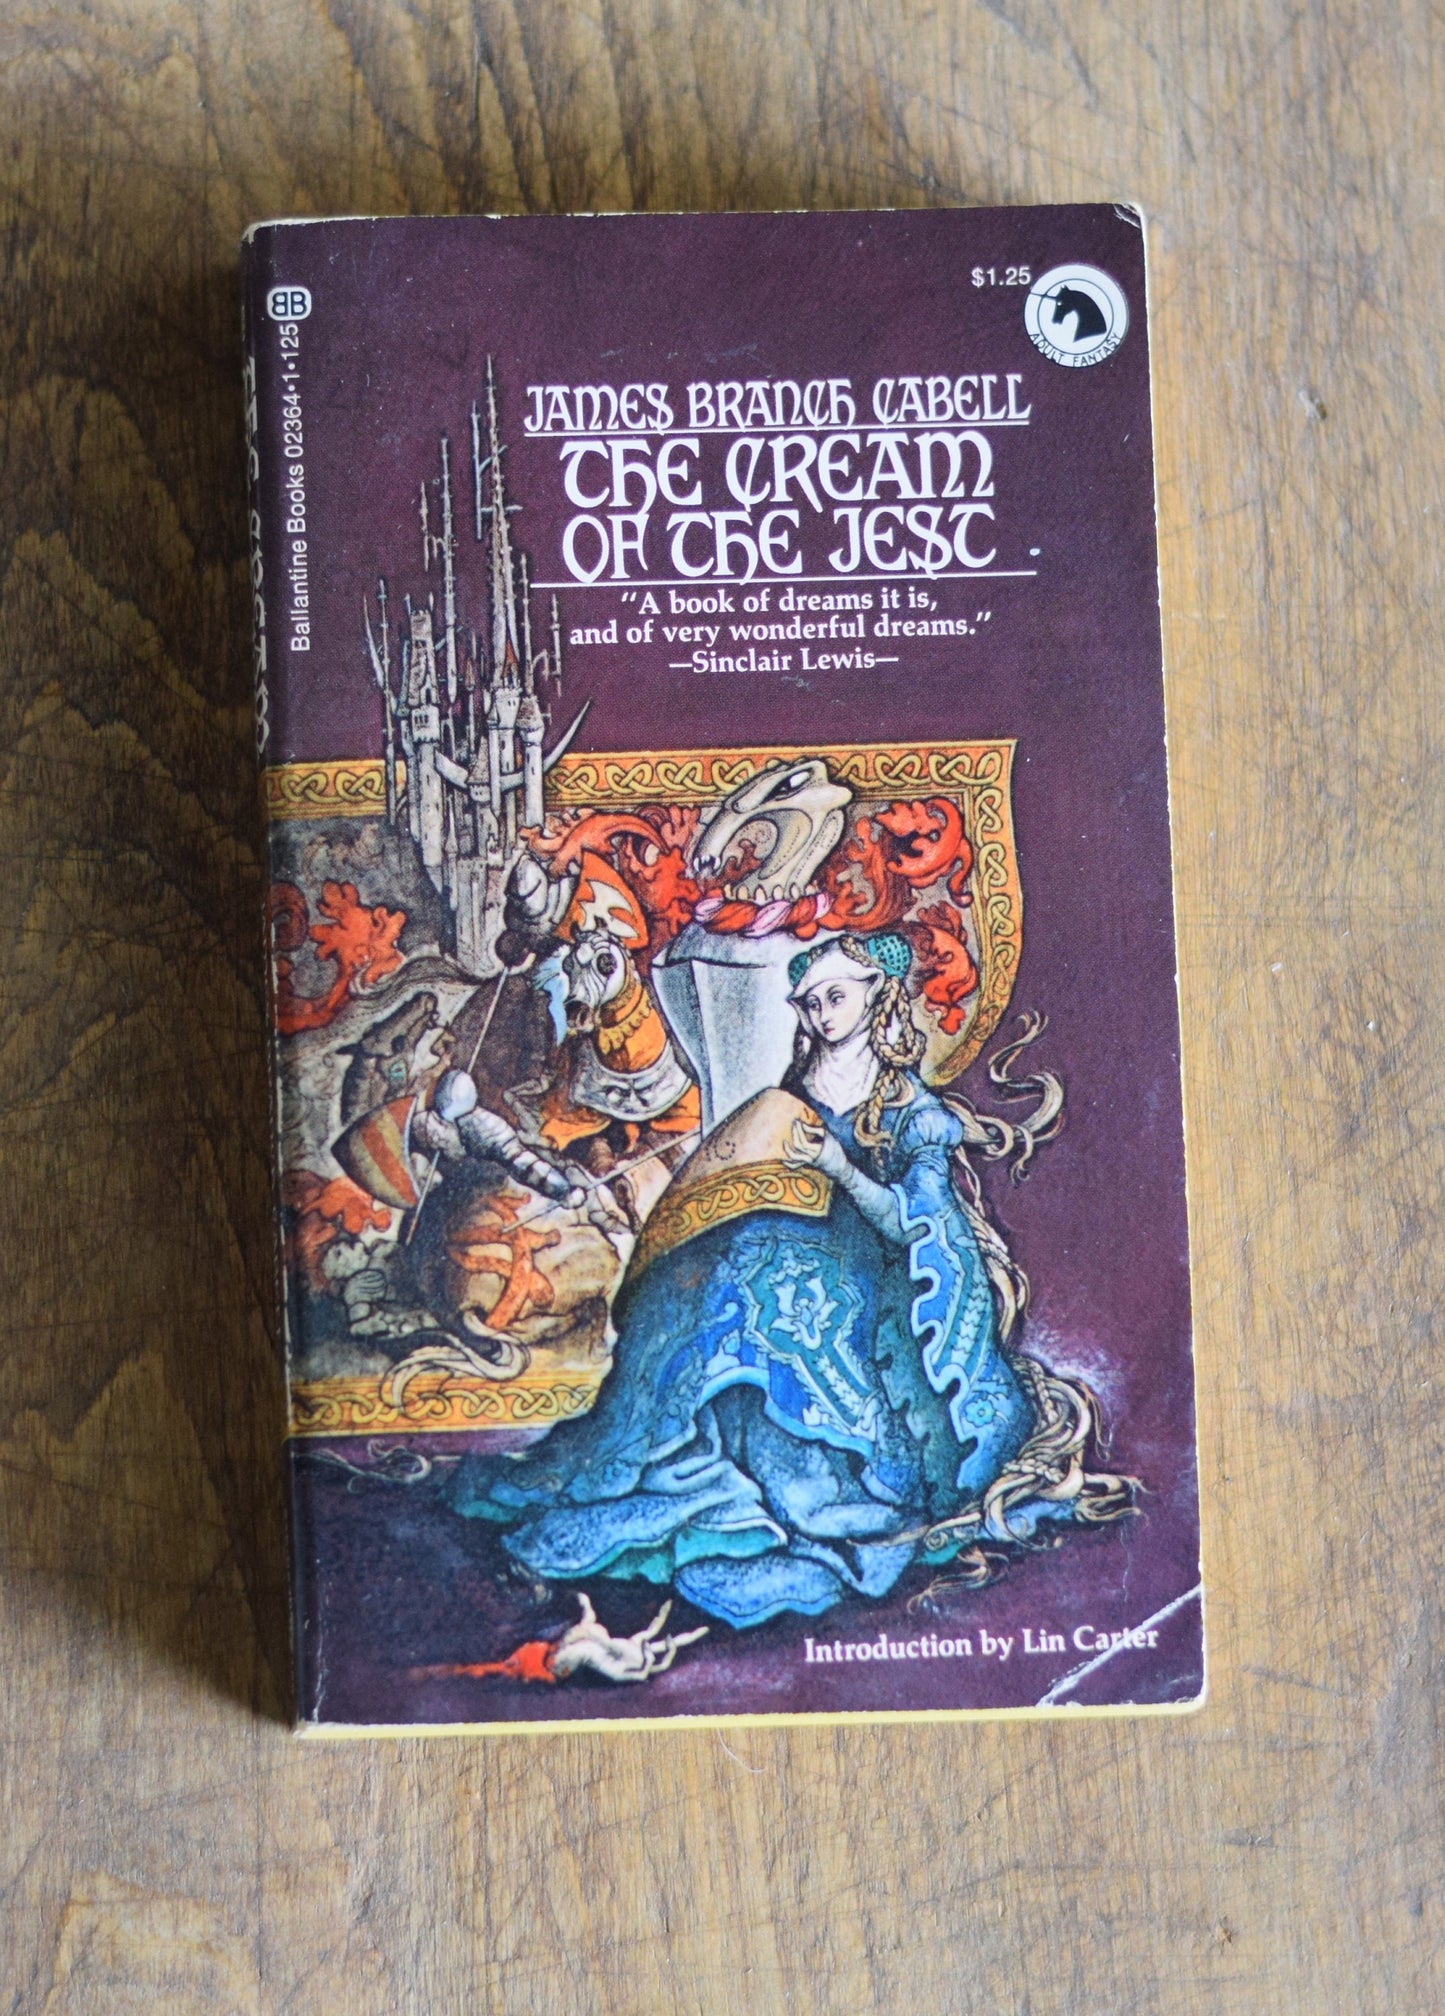 Vintage Fantasy Paperback Novel: James Branch Cabell - The Cream of the Jest FIRST PRINTING